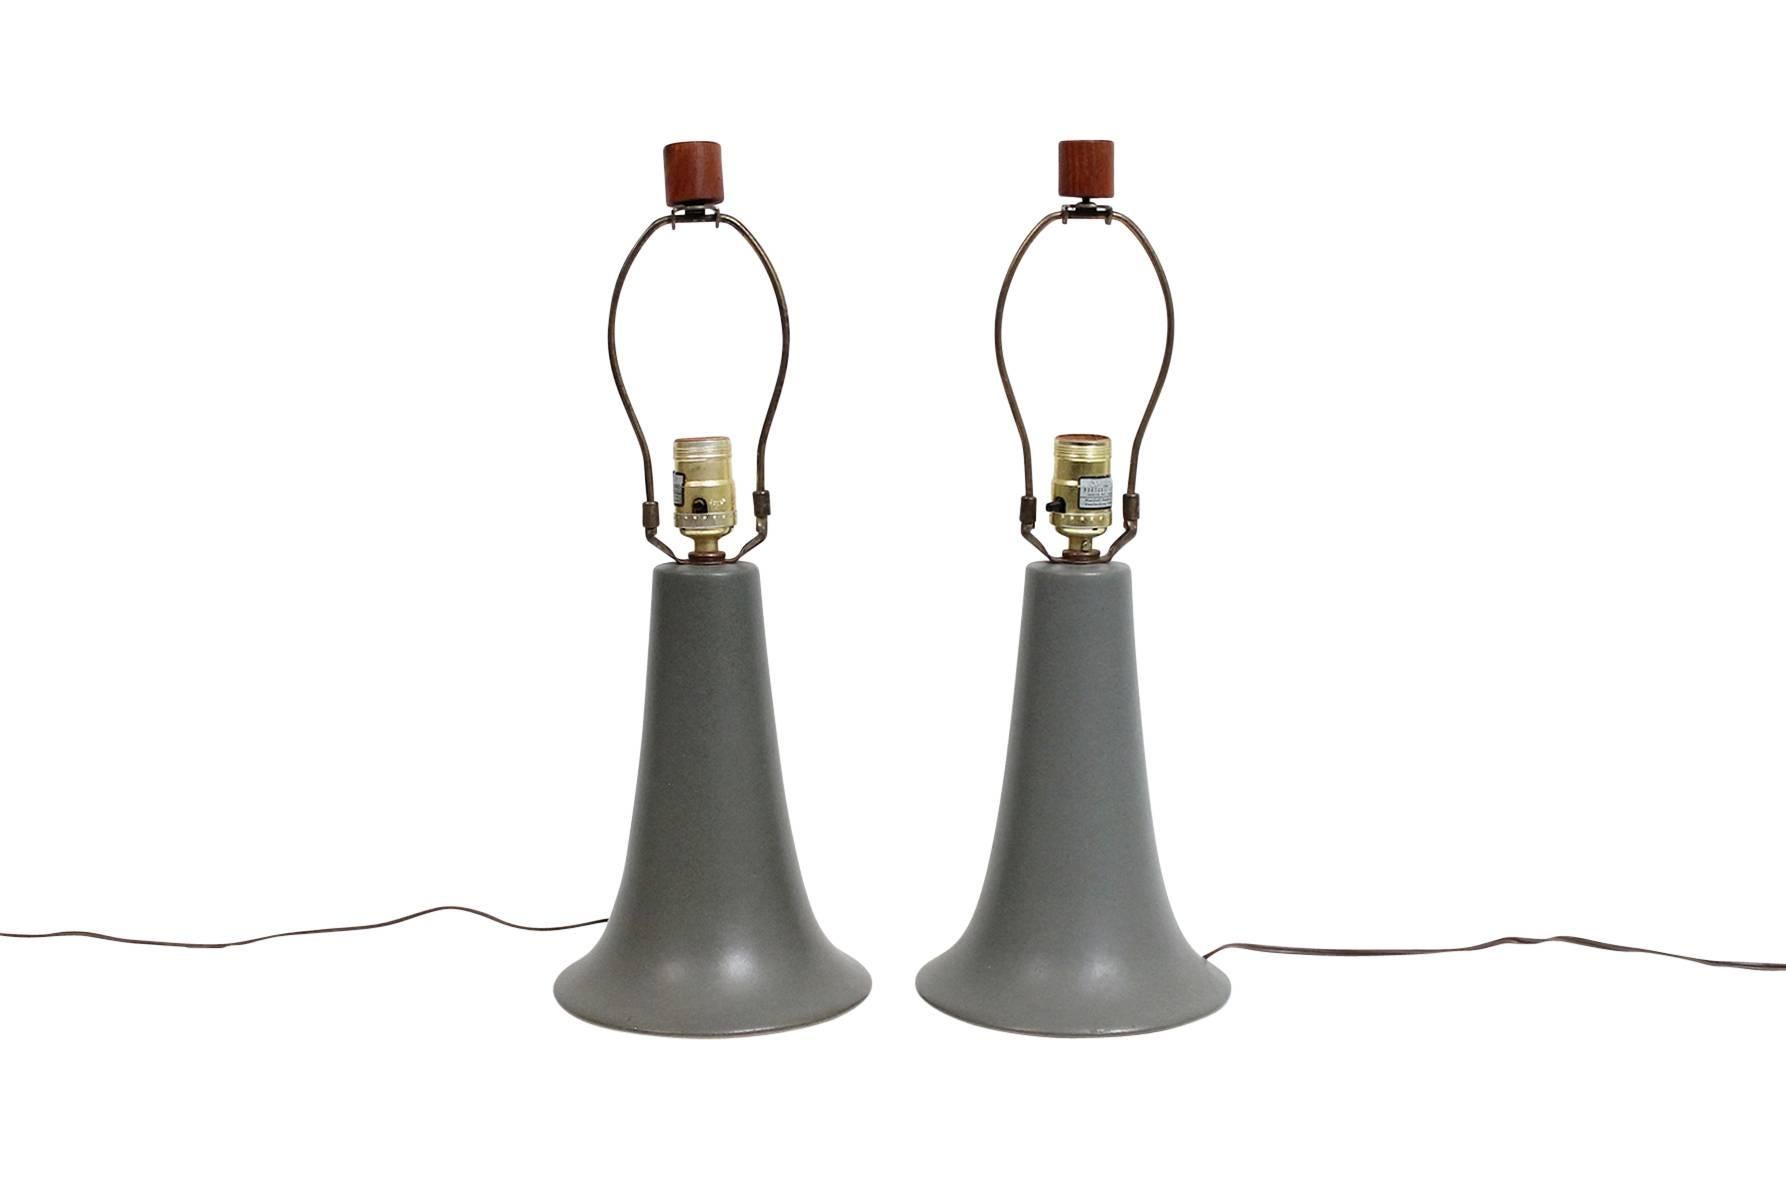 Table lamps by Jane and Gordon Martz for Marshall Studios. Green matte glaze on bell shaped ceramic bases and iconic wooden finials. Both lamps signed. Dimensions below are for lamp with shade pictured. Dimensions of lamp body: Height 10